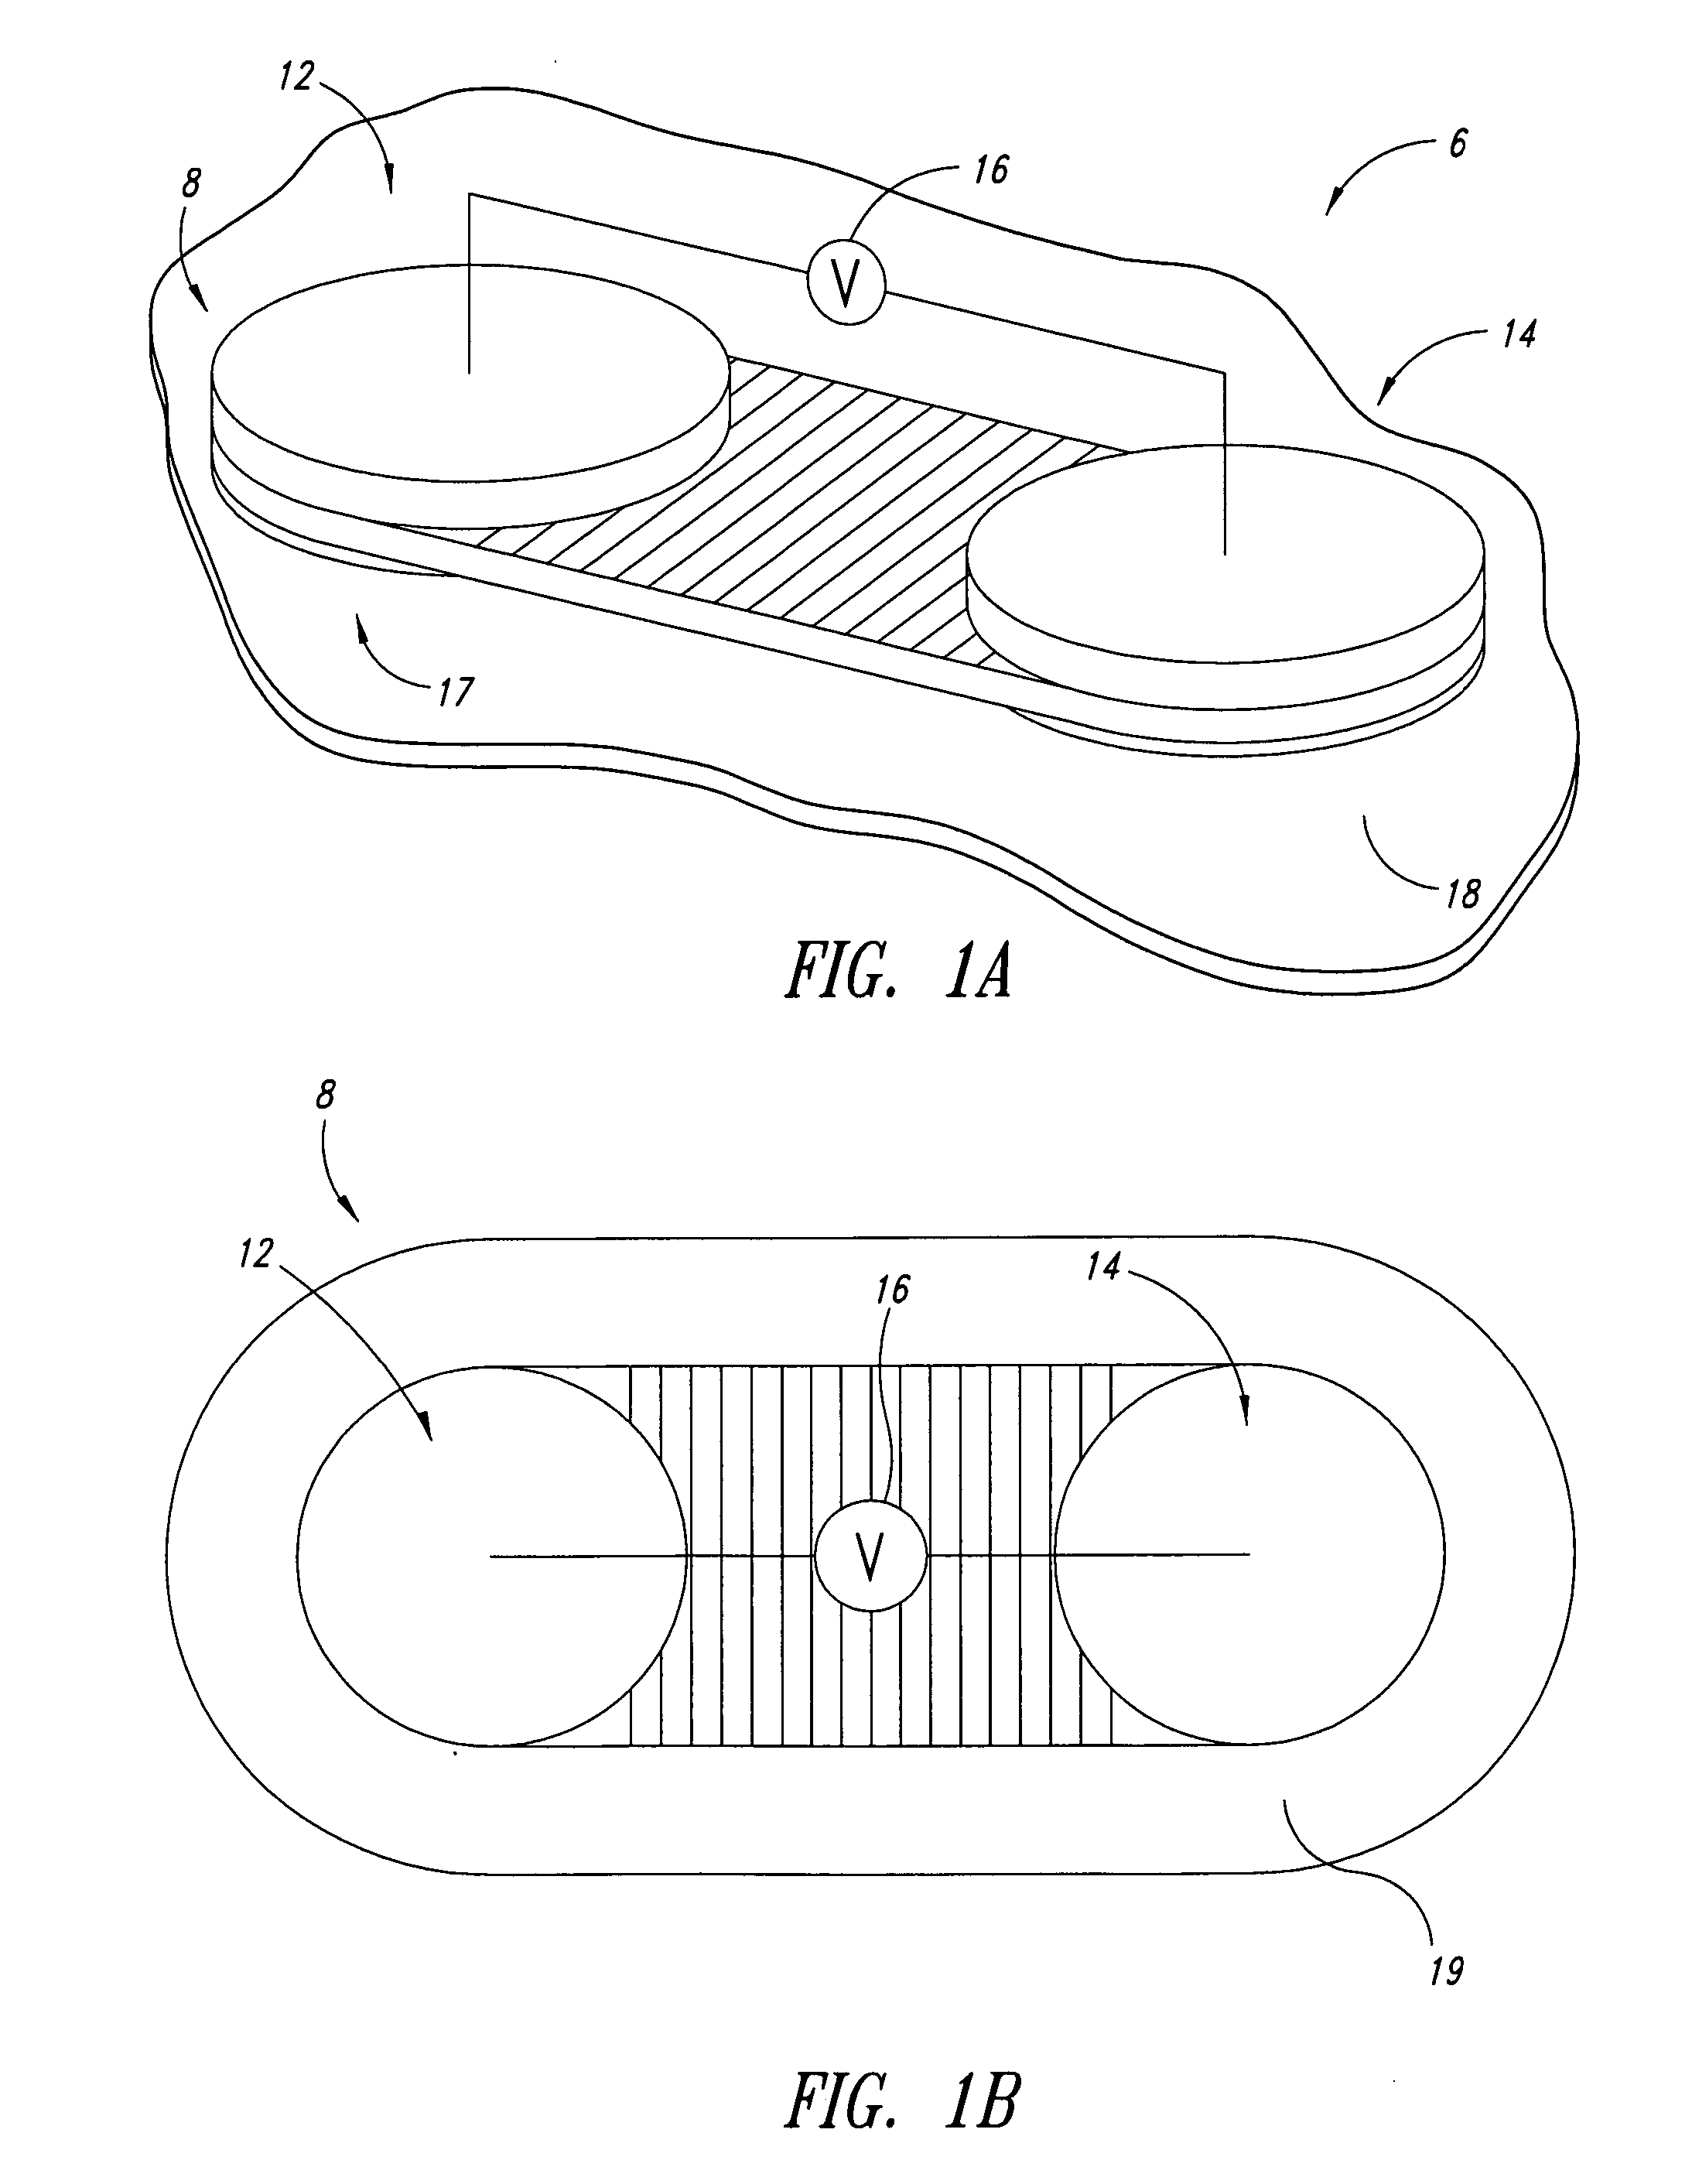 Iontophoresis apparatus and method for delivery of angiogenic factors to enhance healing of injured tissue